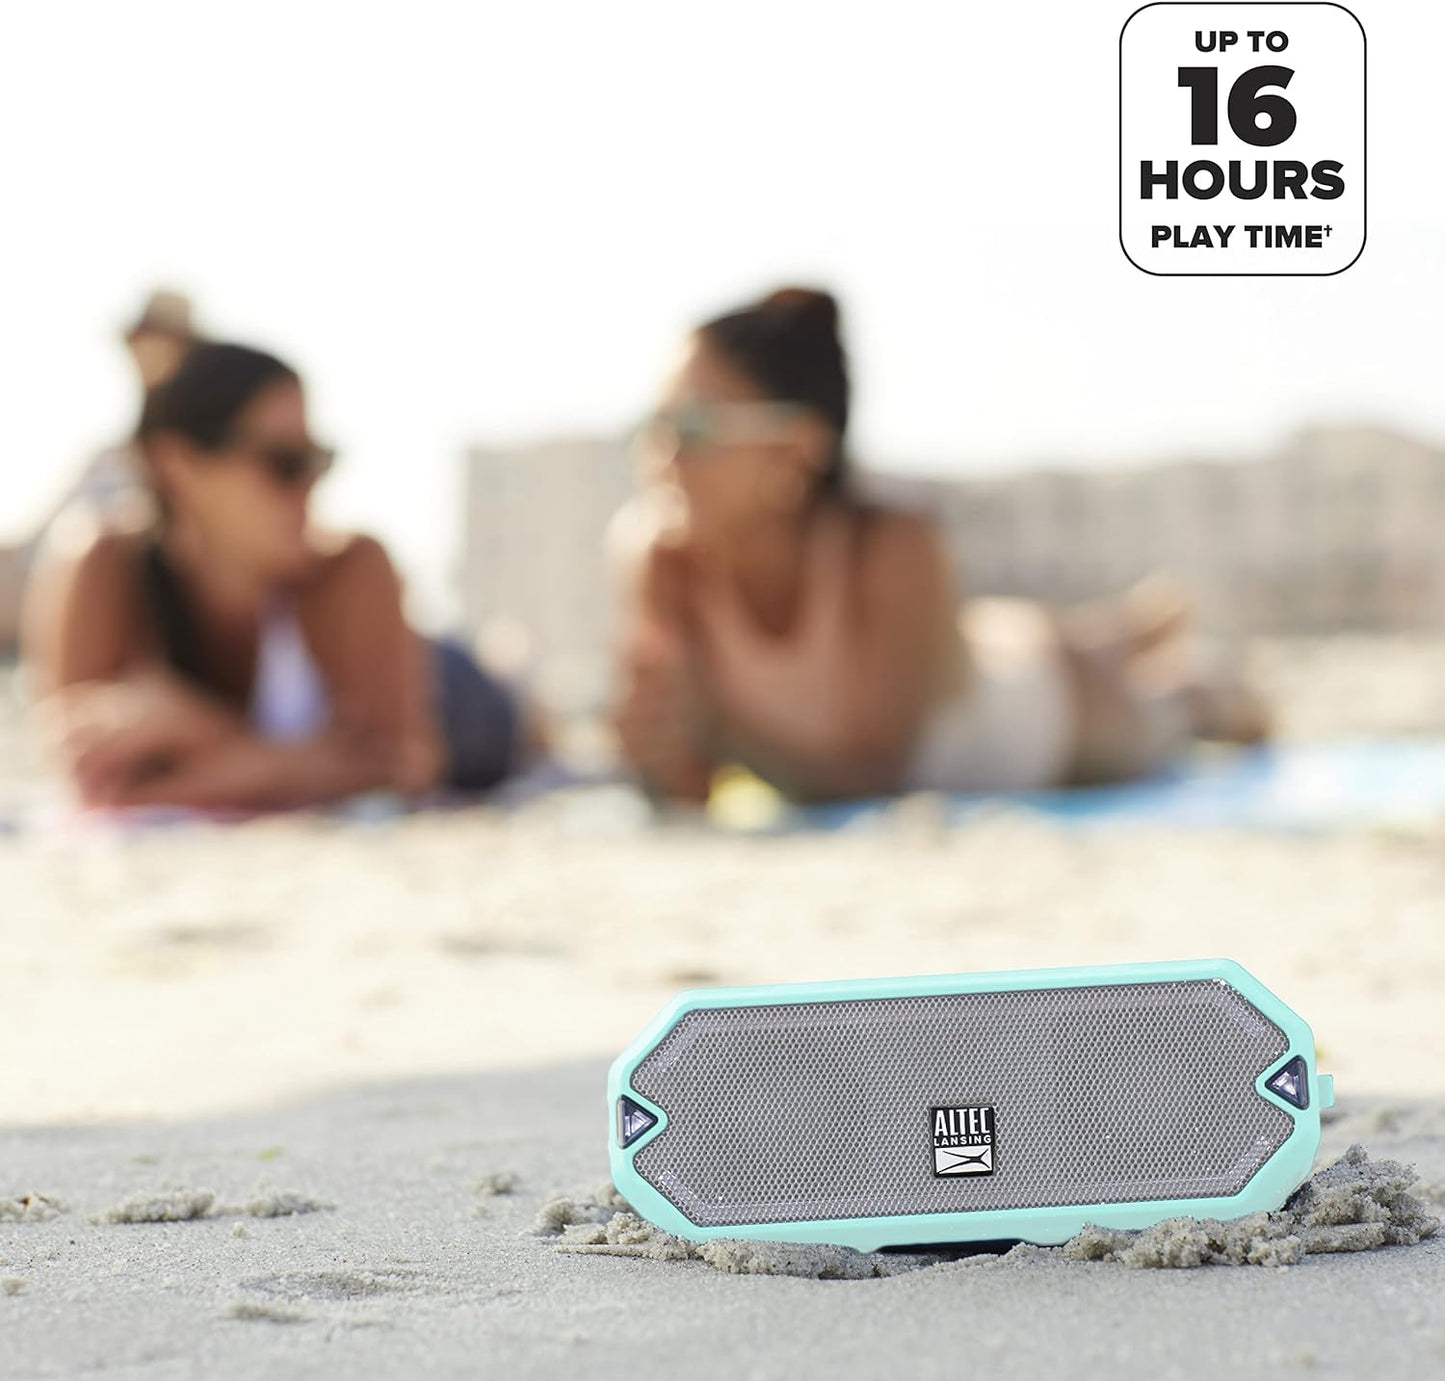 Altec Lansing HydraJolt Wireless Bluetooth Speaker, Waterproof Portable Speakers with Built in Phone Charger and Lights, Everything Proof Outdoor, Shockproof, Snowproof, 16 Hours Playtime